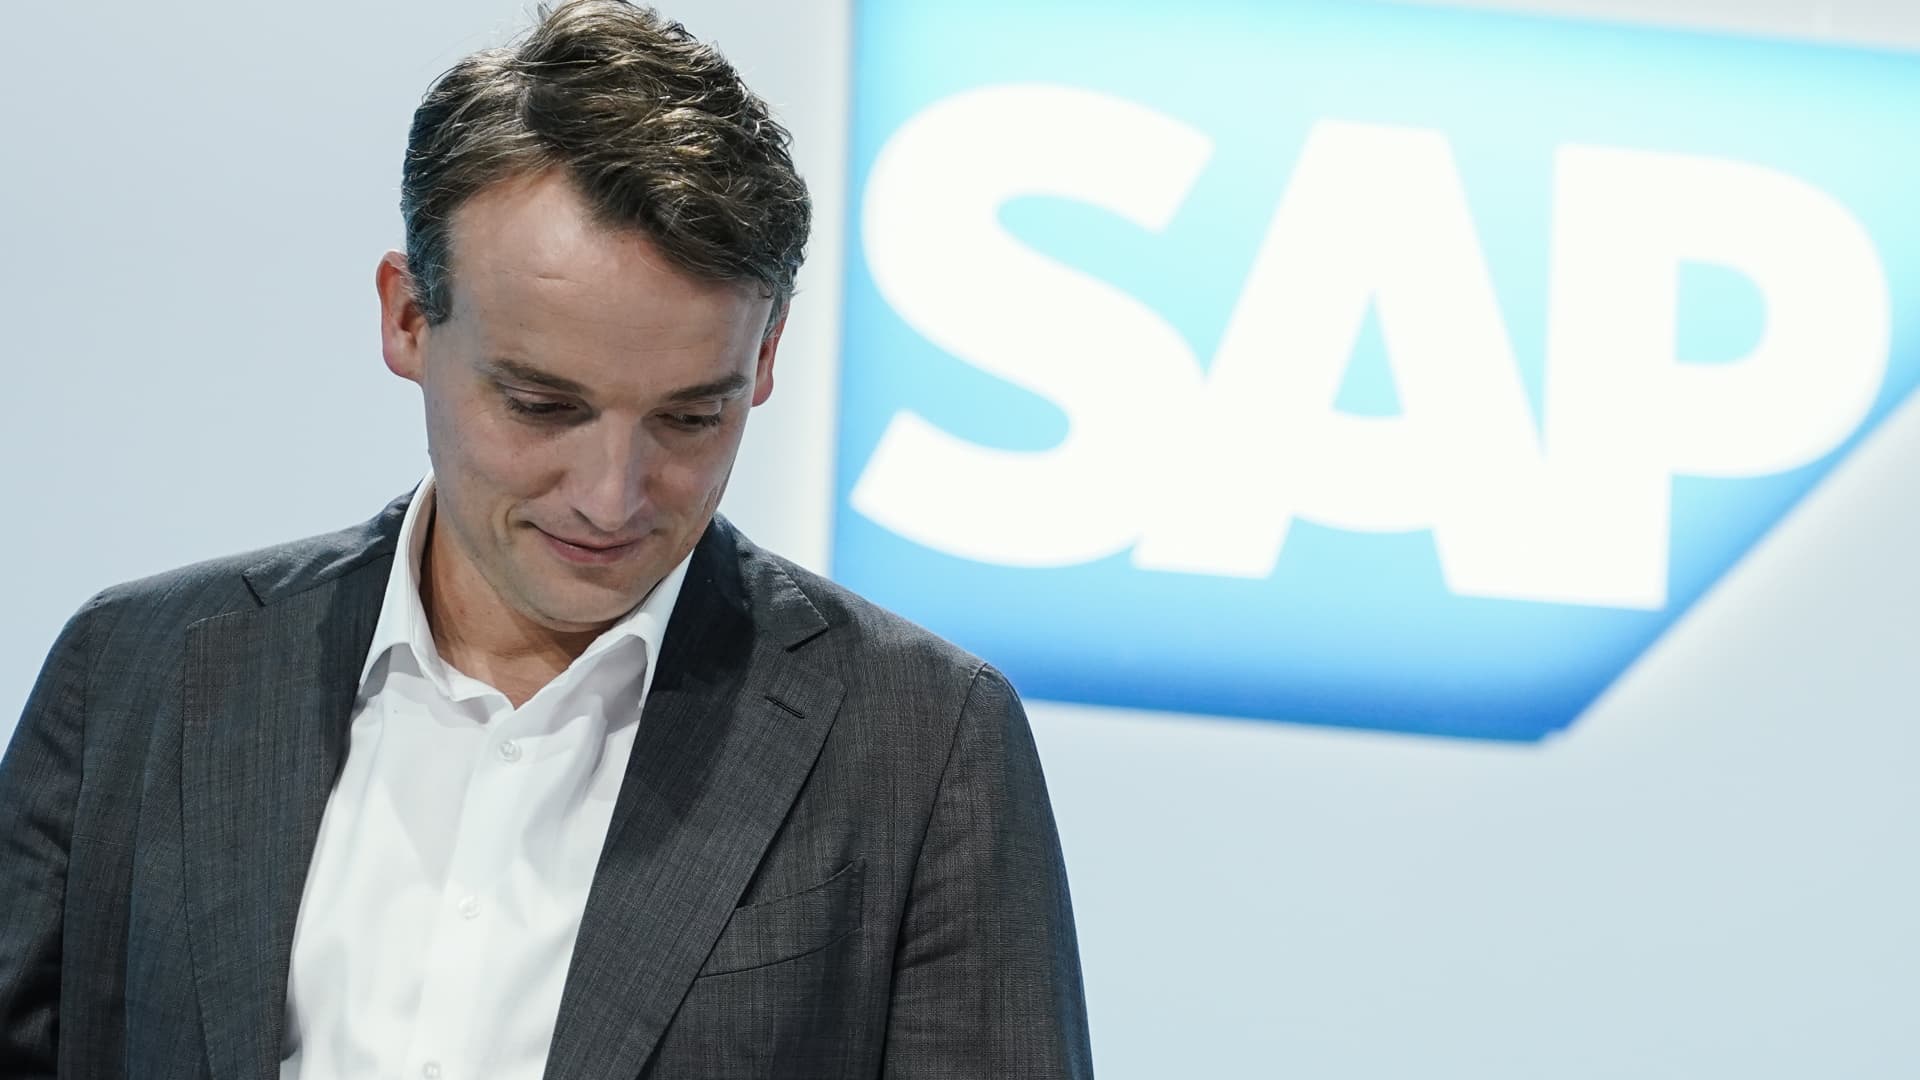 SAP plans job changes or buyouts for 8,000 employees in restructuring